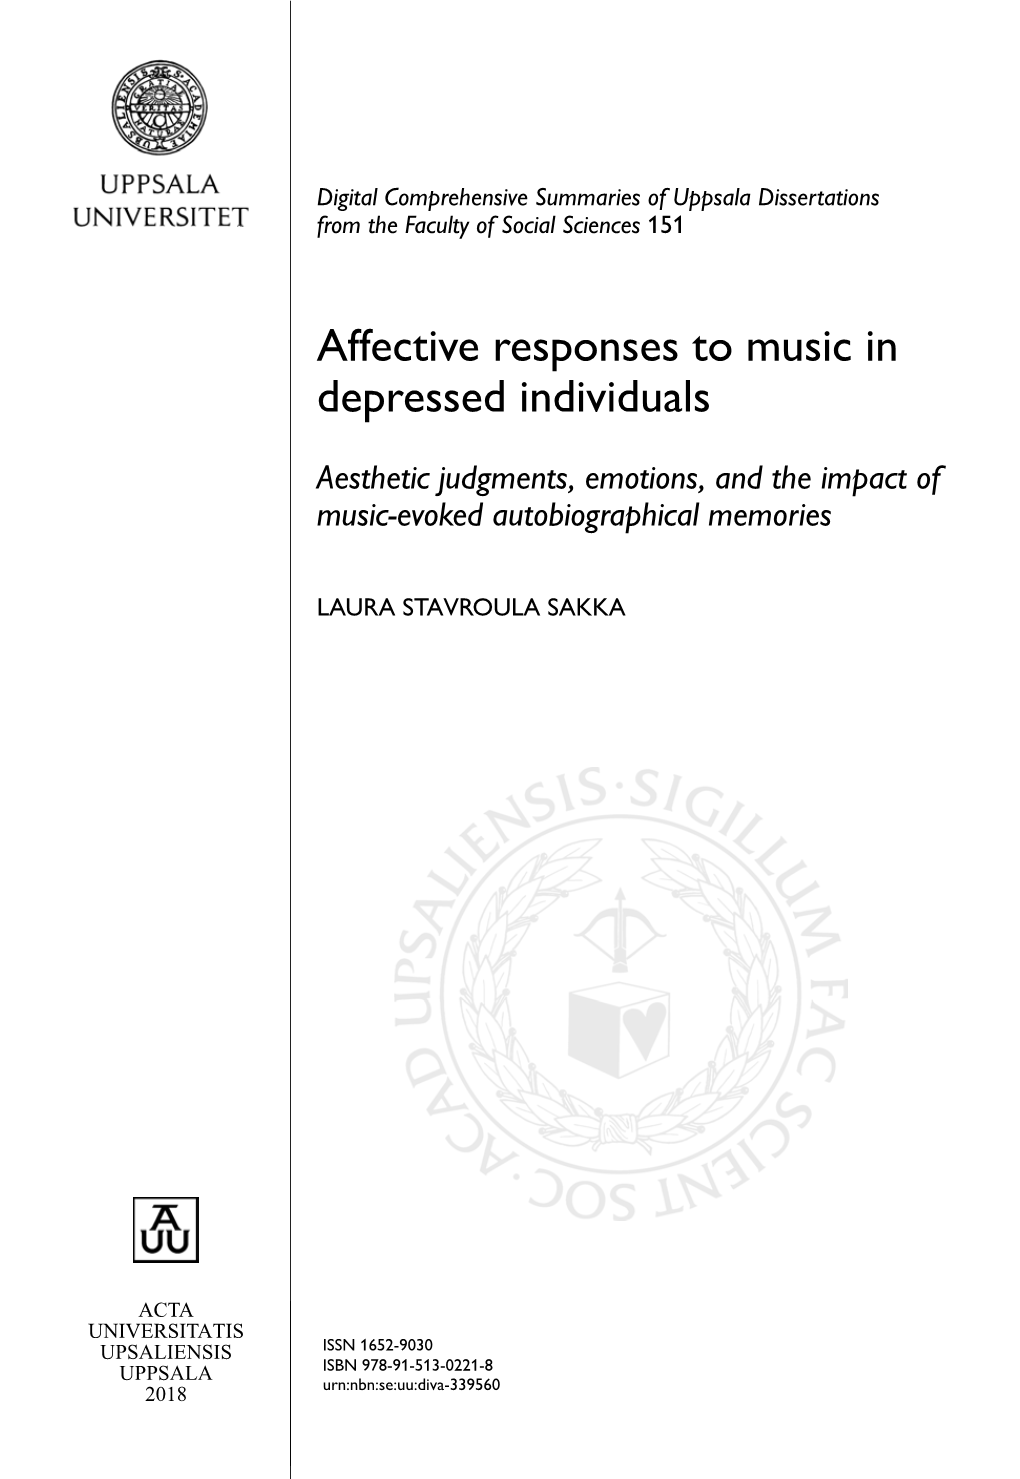 Affective Responses to Music in Depressed Individuals